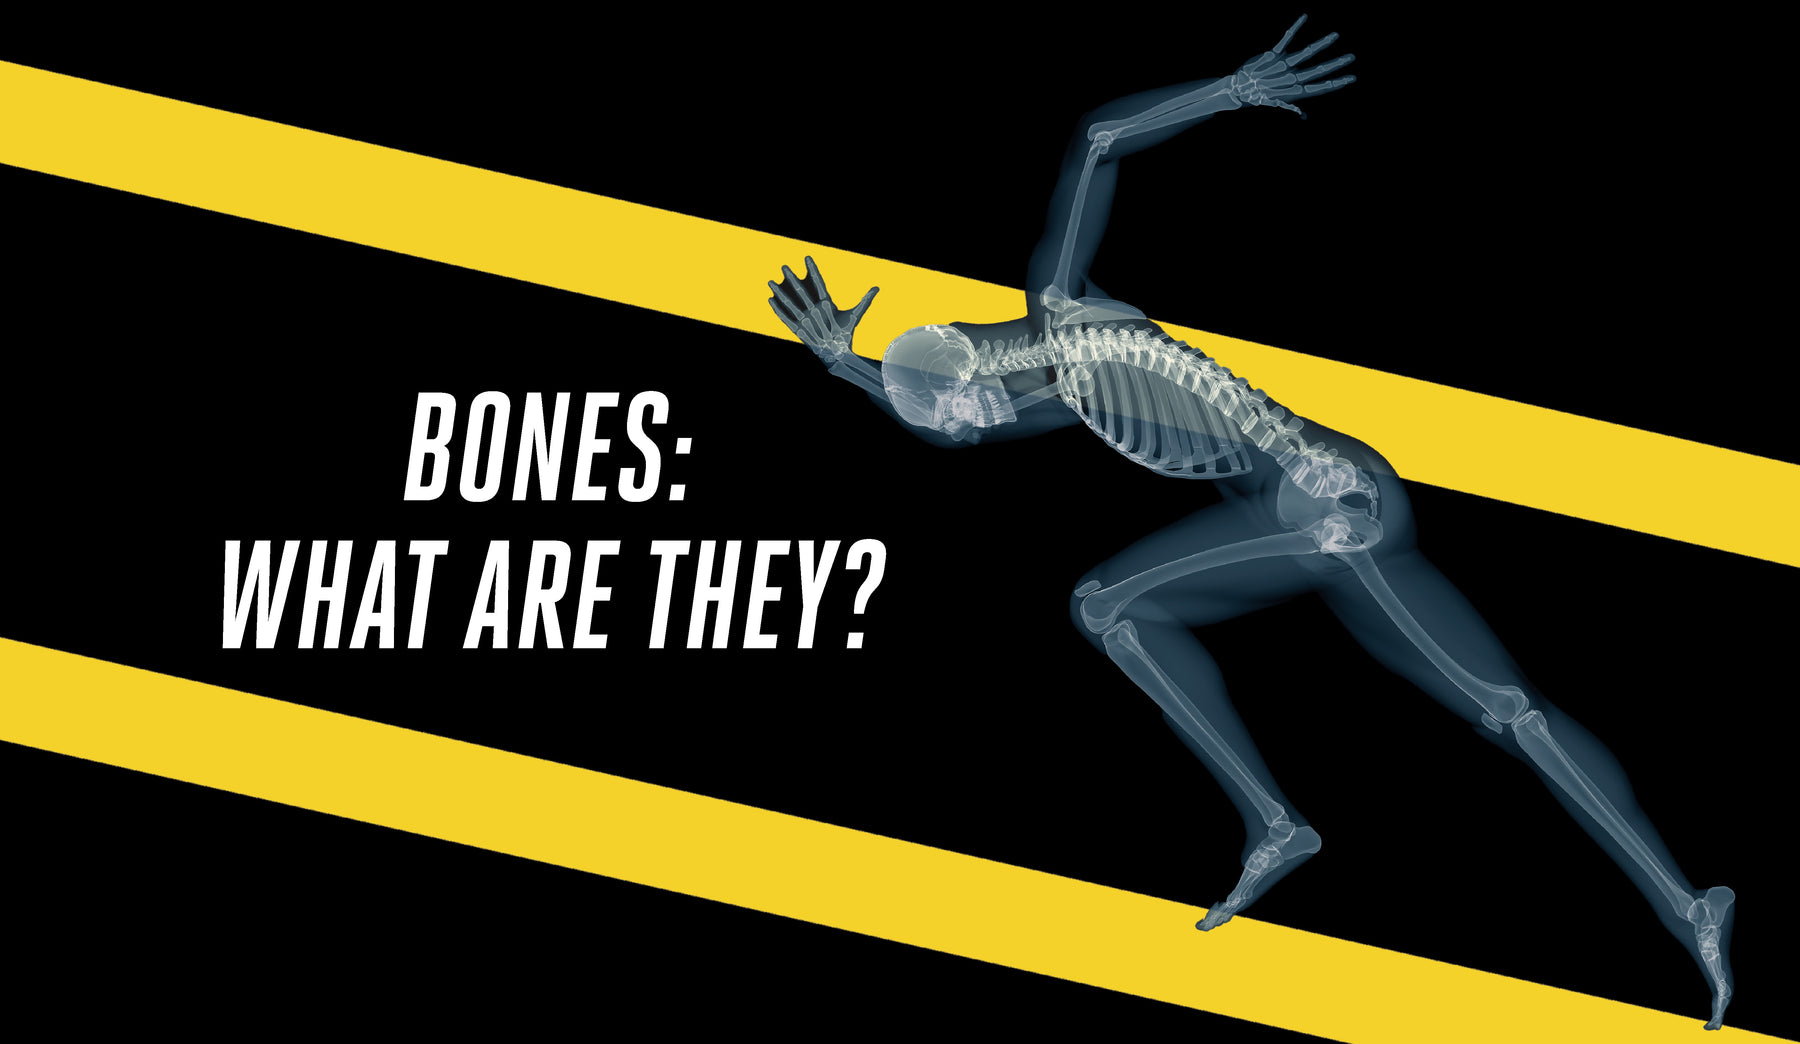 Bones: What are they?